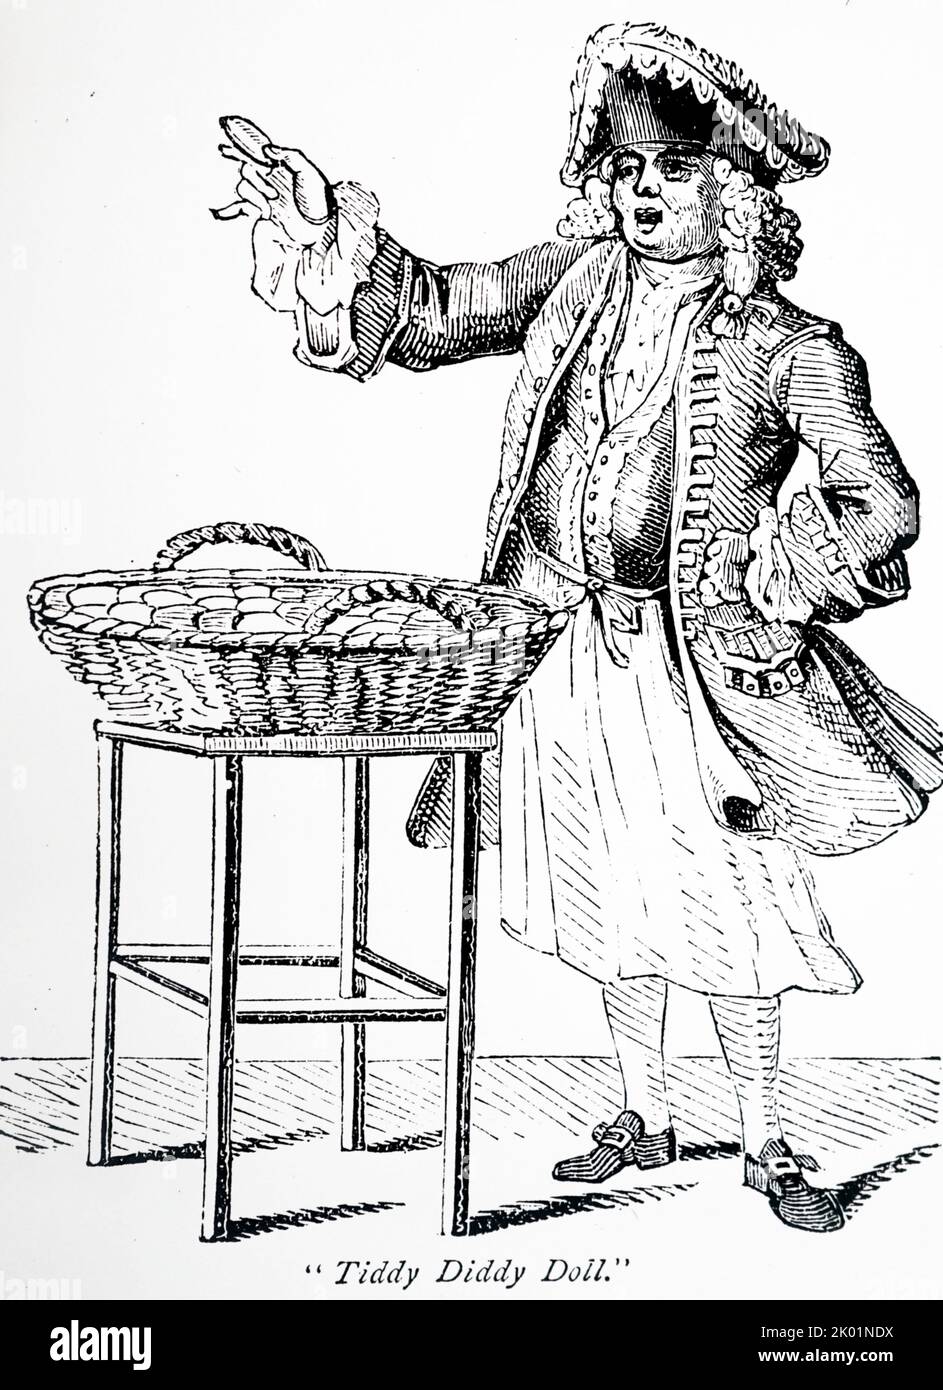 Tiddy Diddy Doll, famous 18th century gingerbread seller. Stock Photo